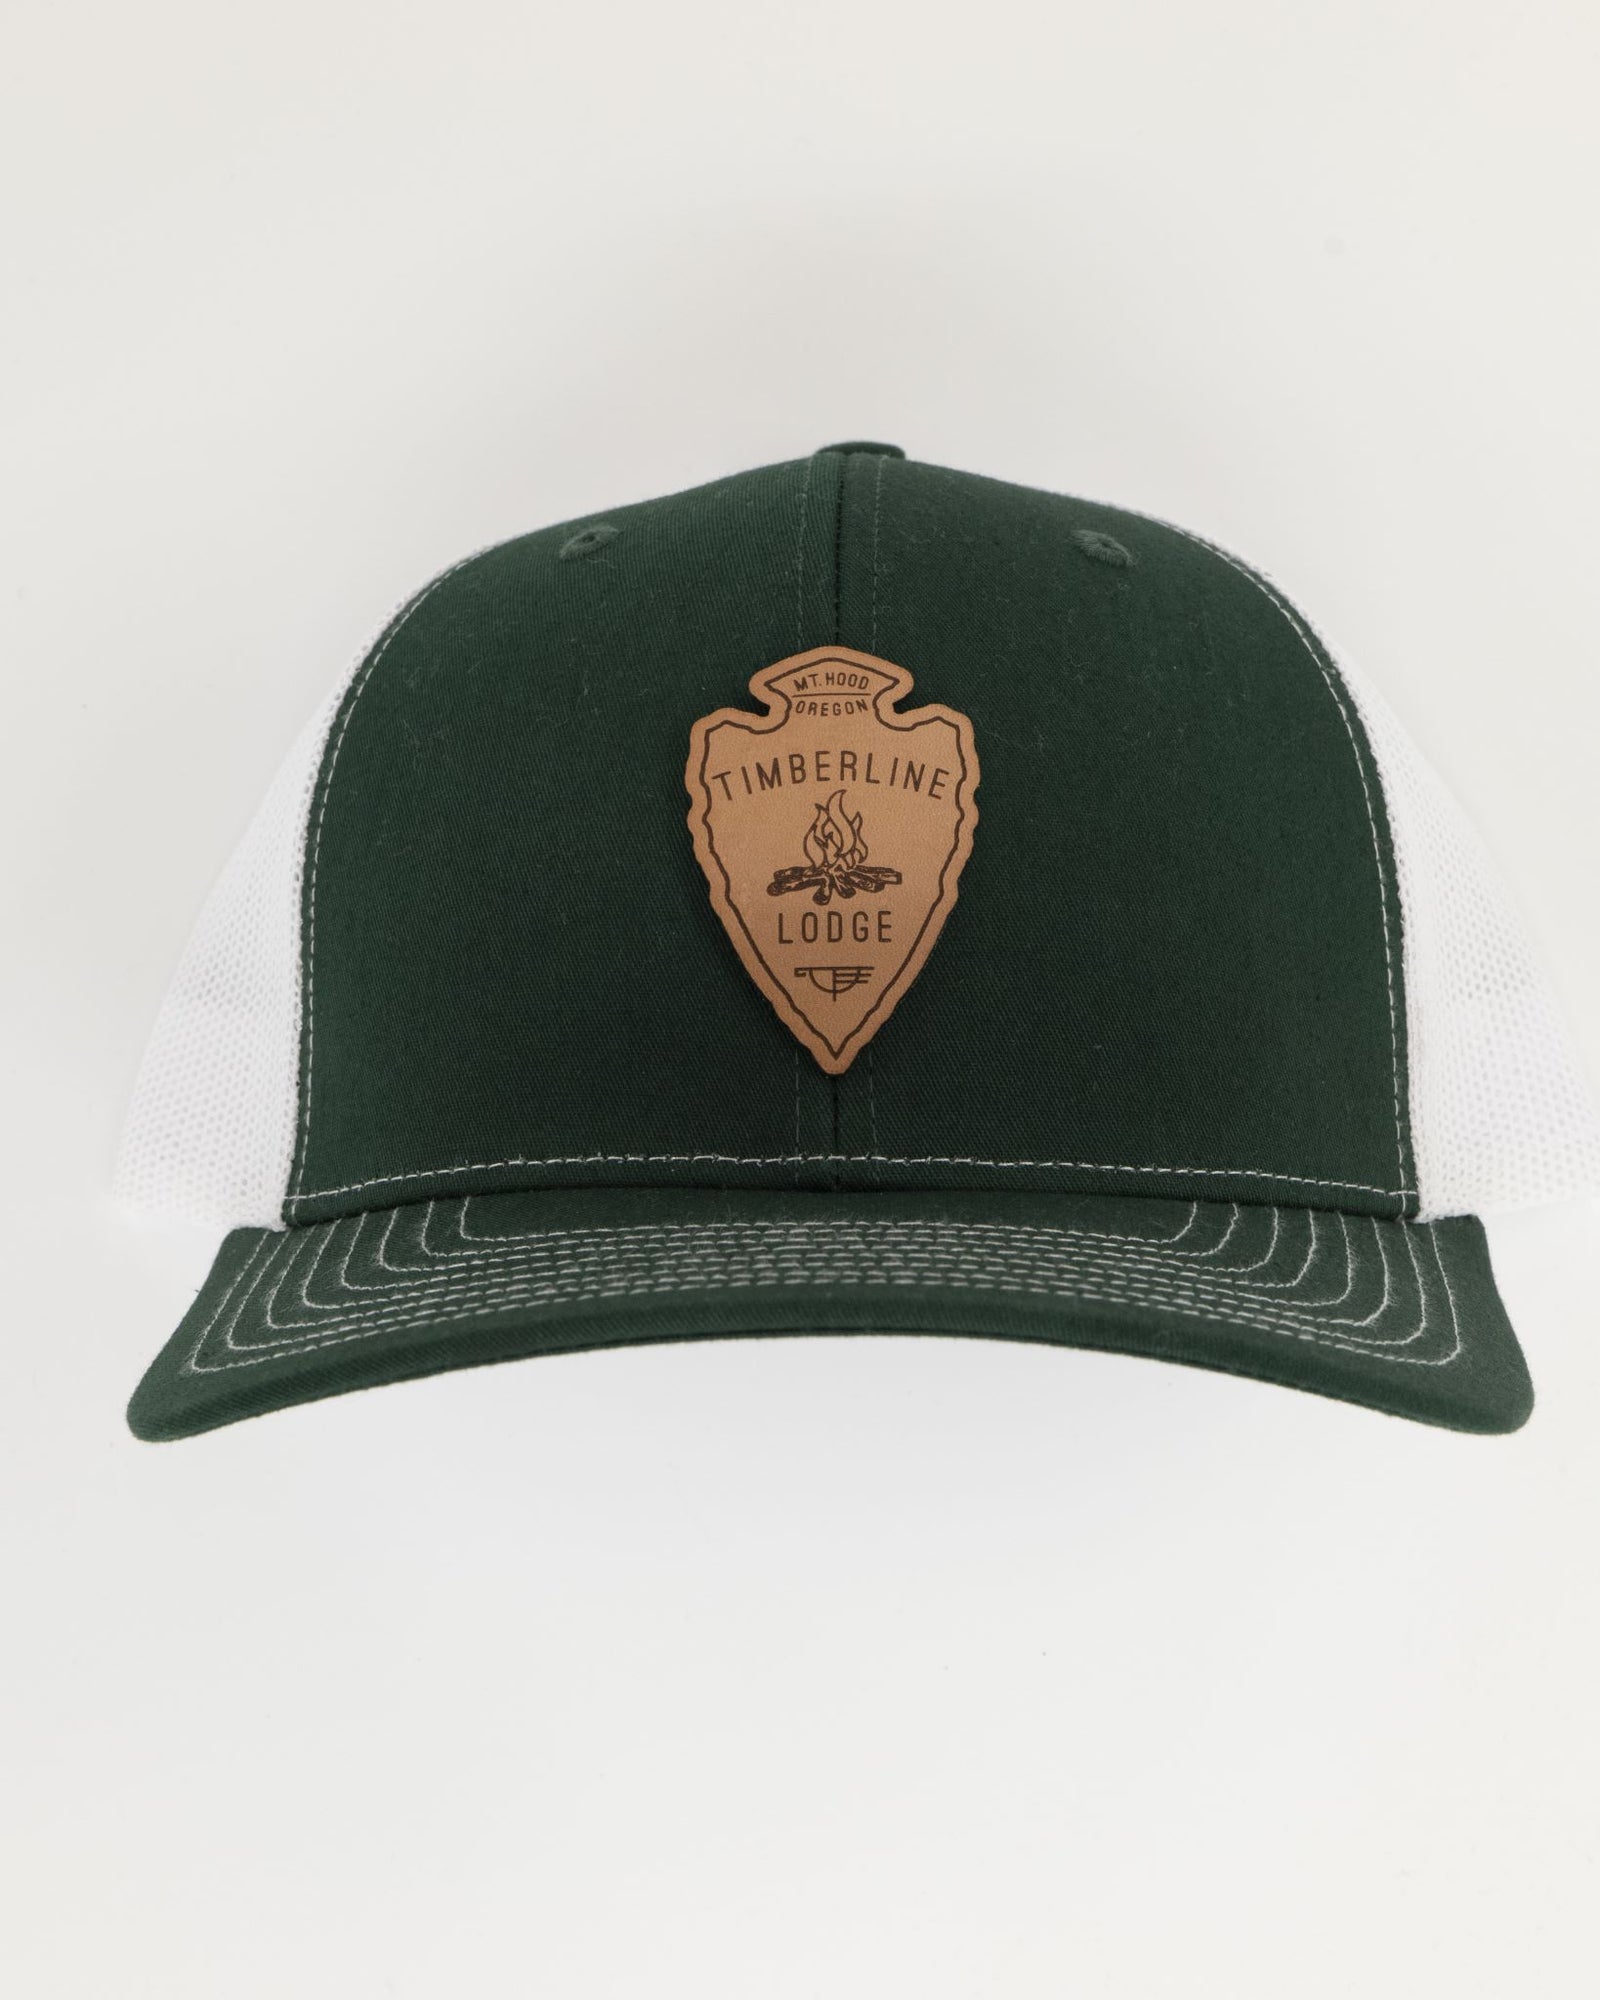 - Blue Navy Cap Store Timberline - - Hat Iconic Lodge Online